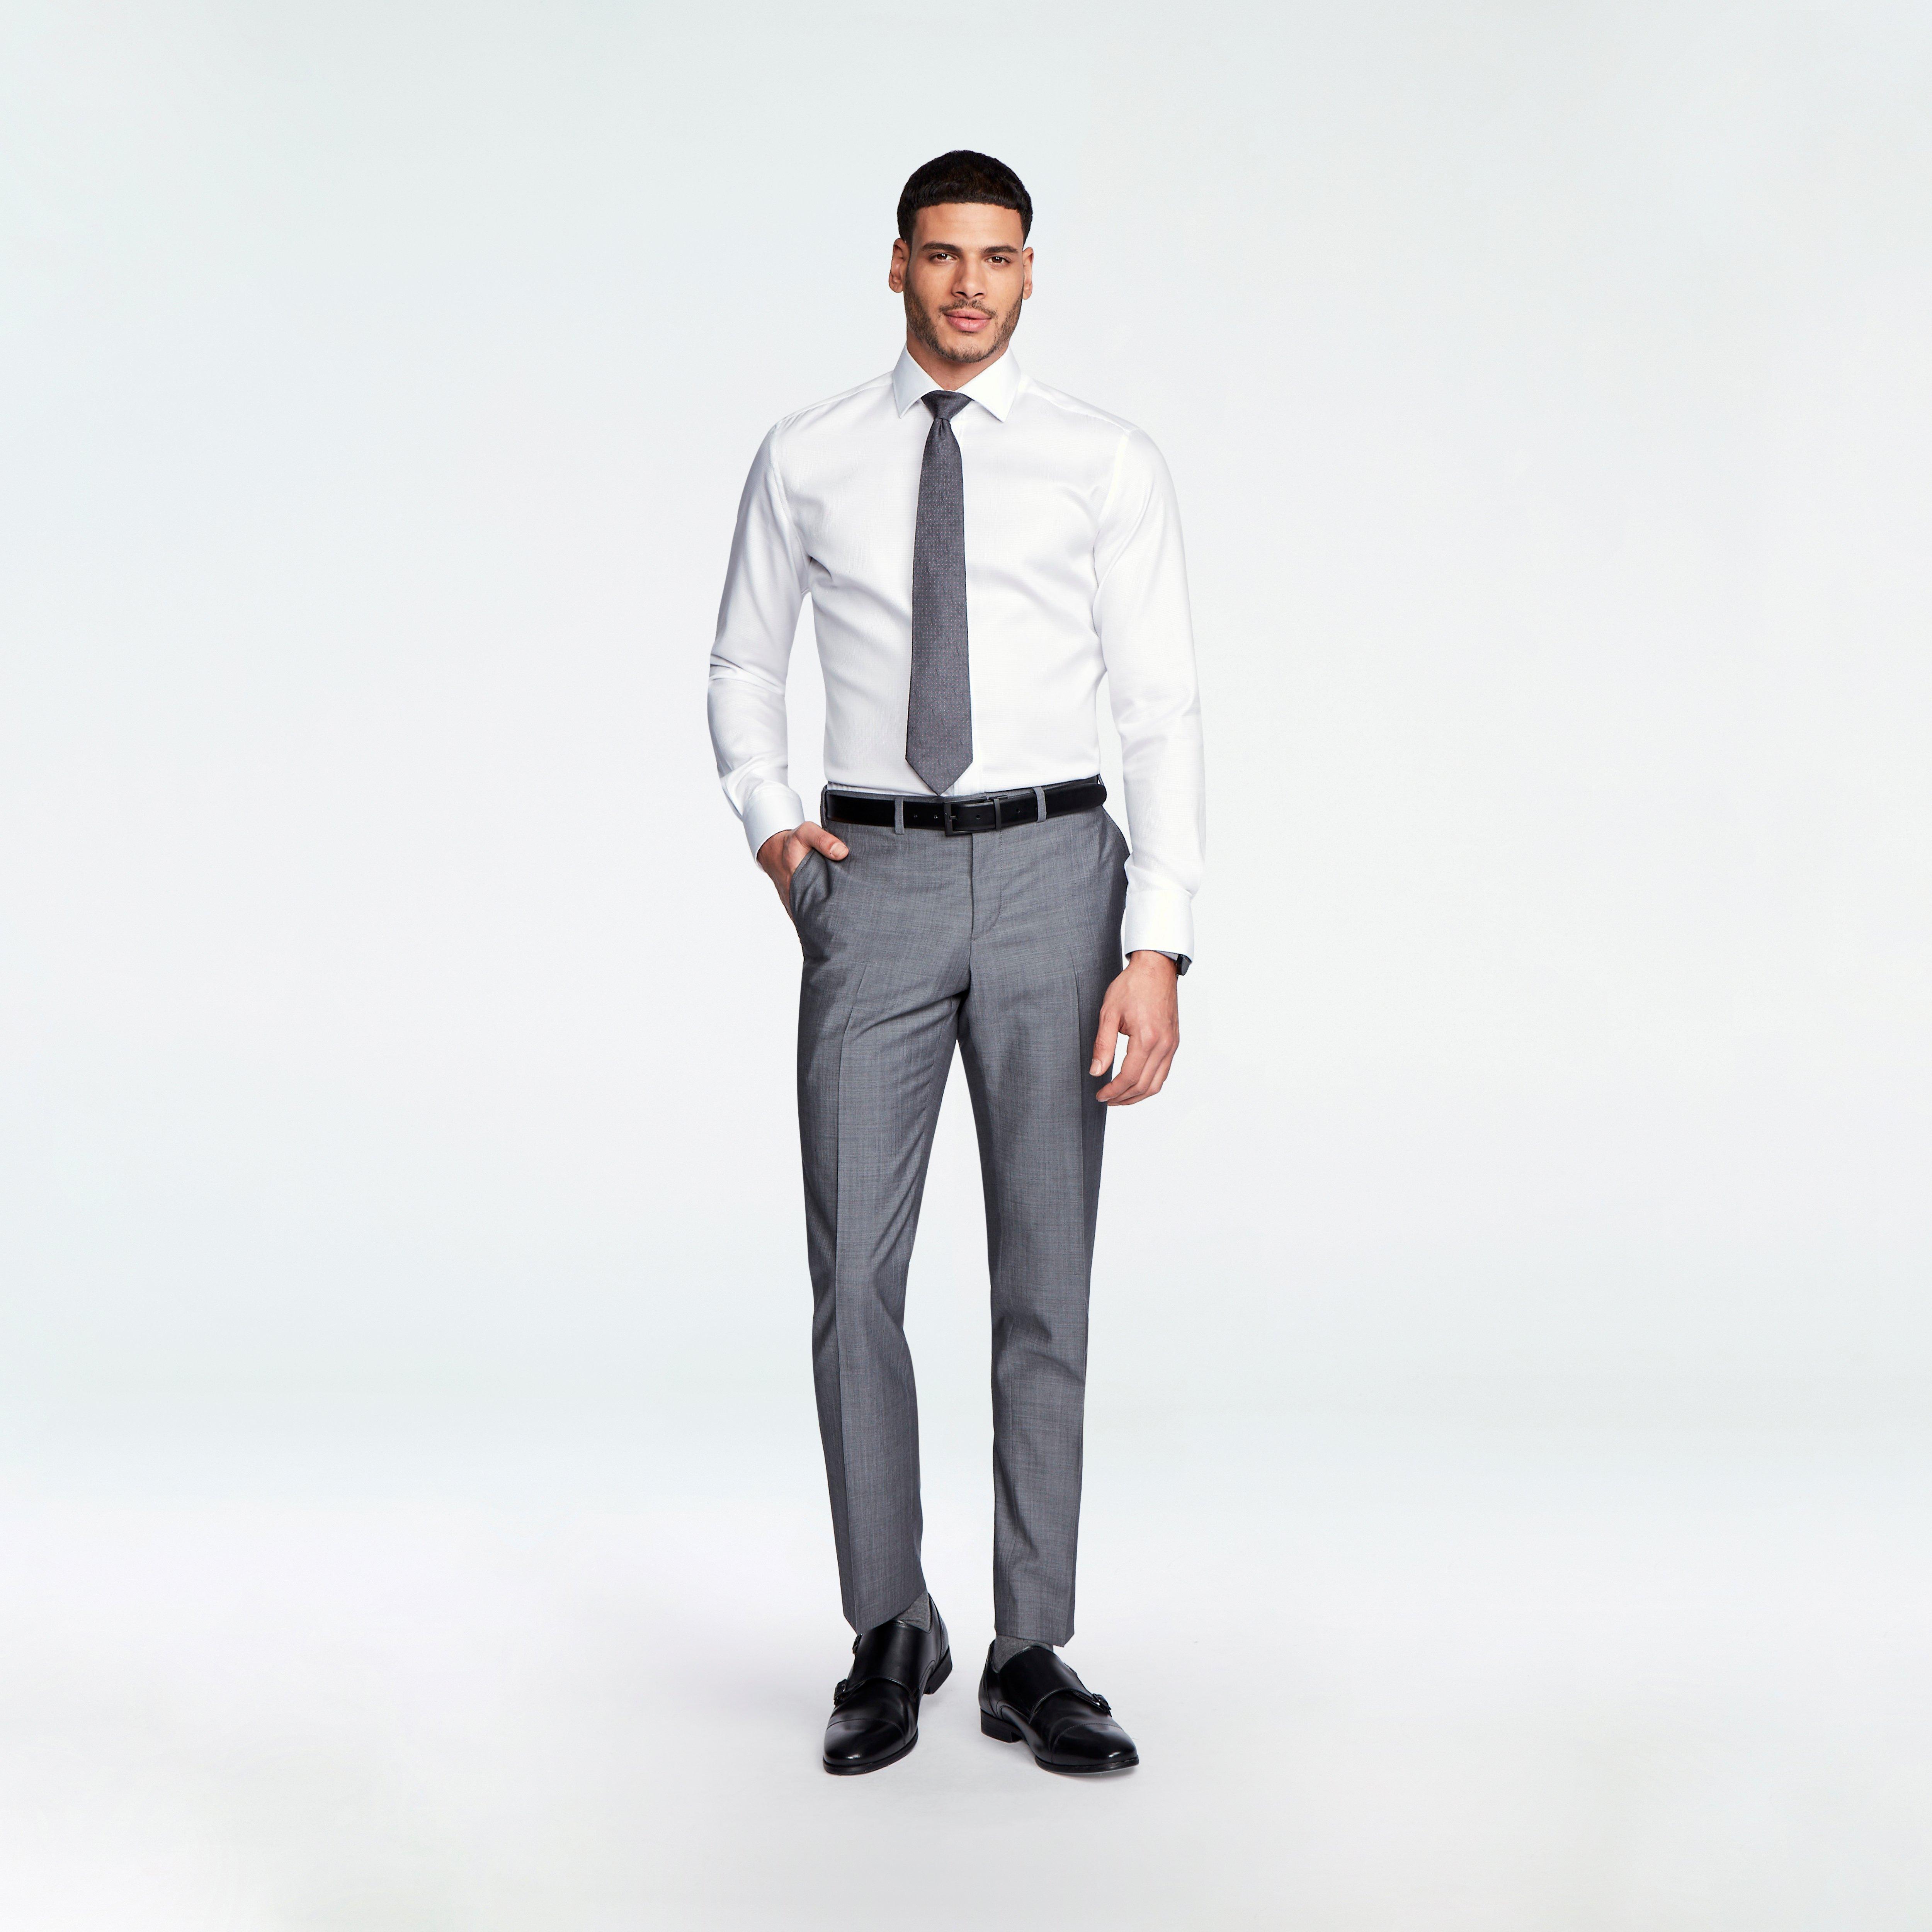 Custom Suits Made For You - Hamilton Sharkskin Gray Suit | INDOCHINO